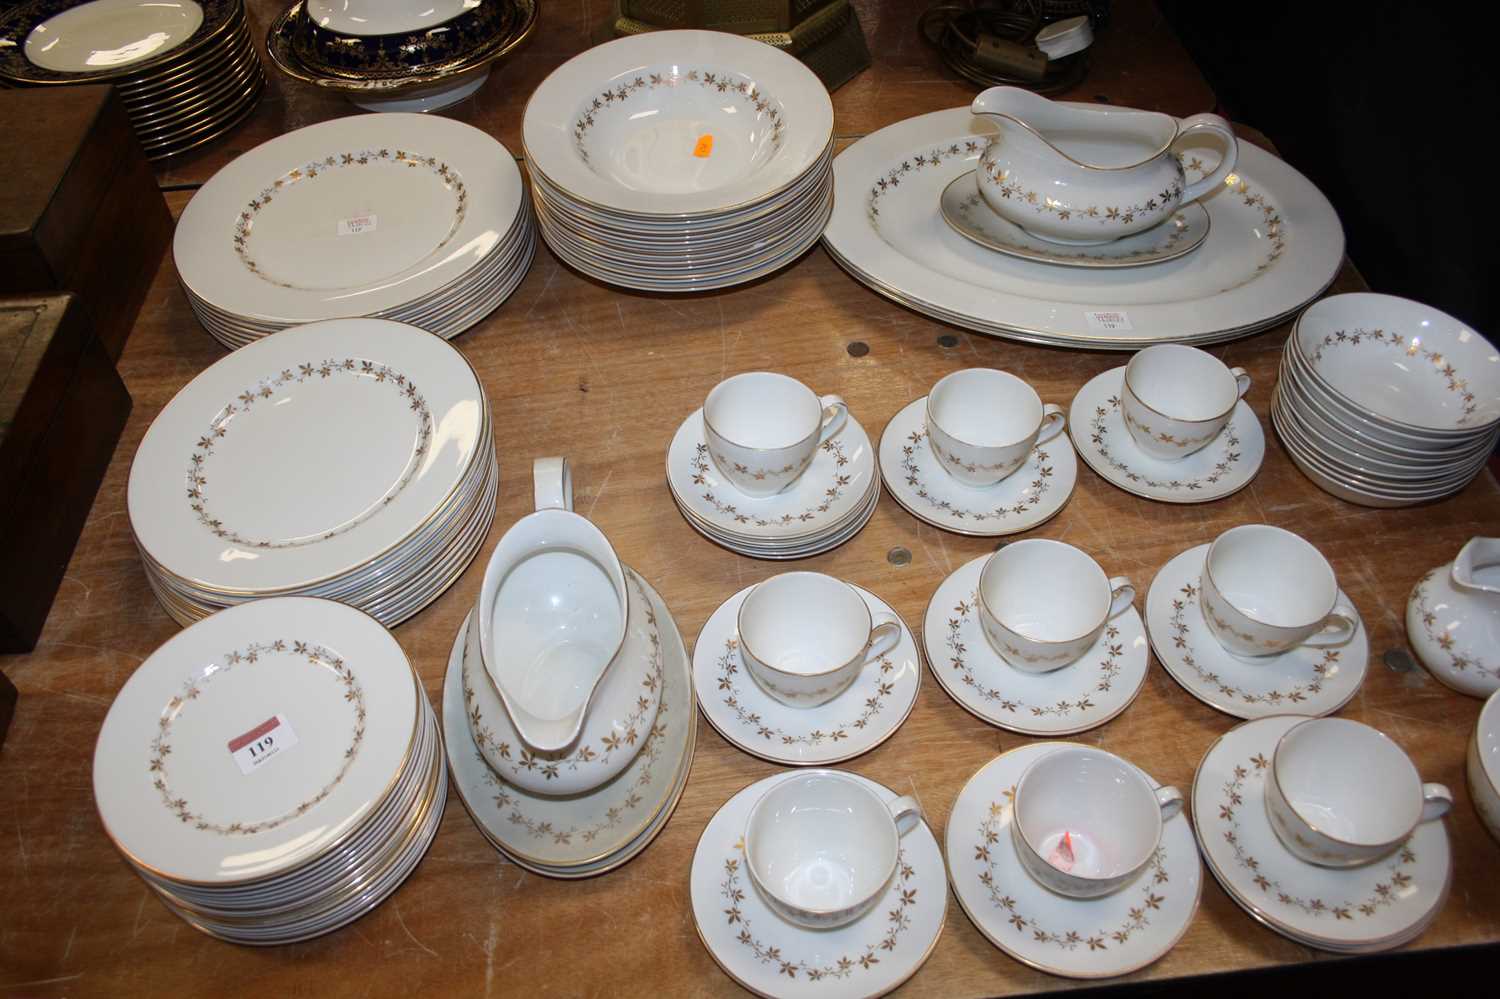 A Royal Doulton Citadel pattern porcelain dinner serviceAll worn used and dirty. One soup plate with